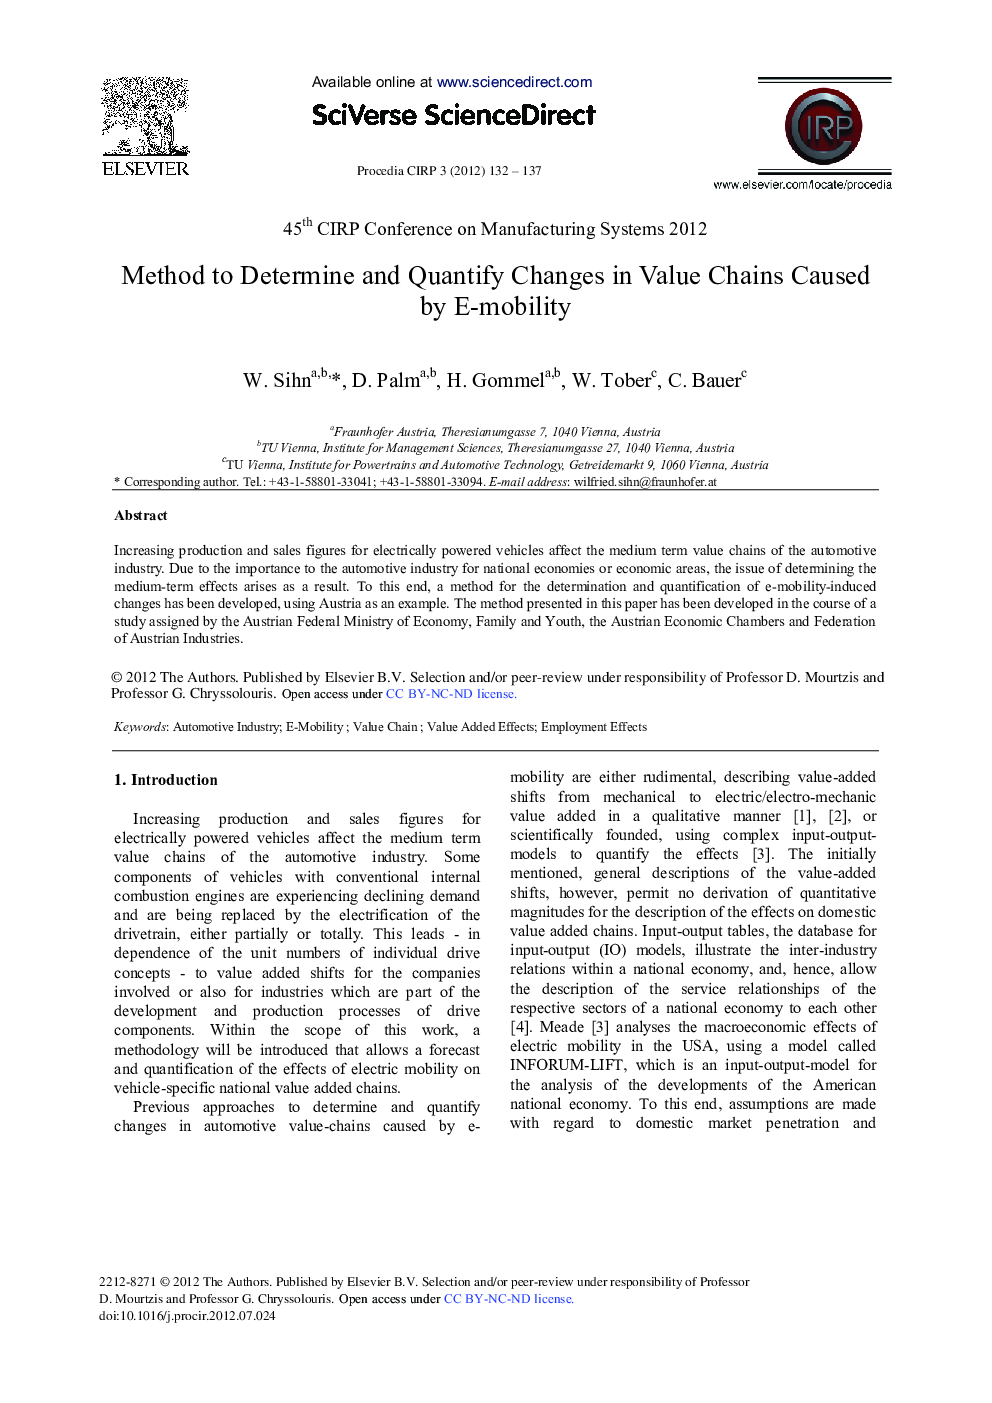 Method to Determine and Quantify Changes in Value Chains Caused by E-mobility